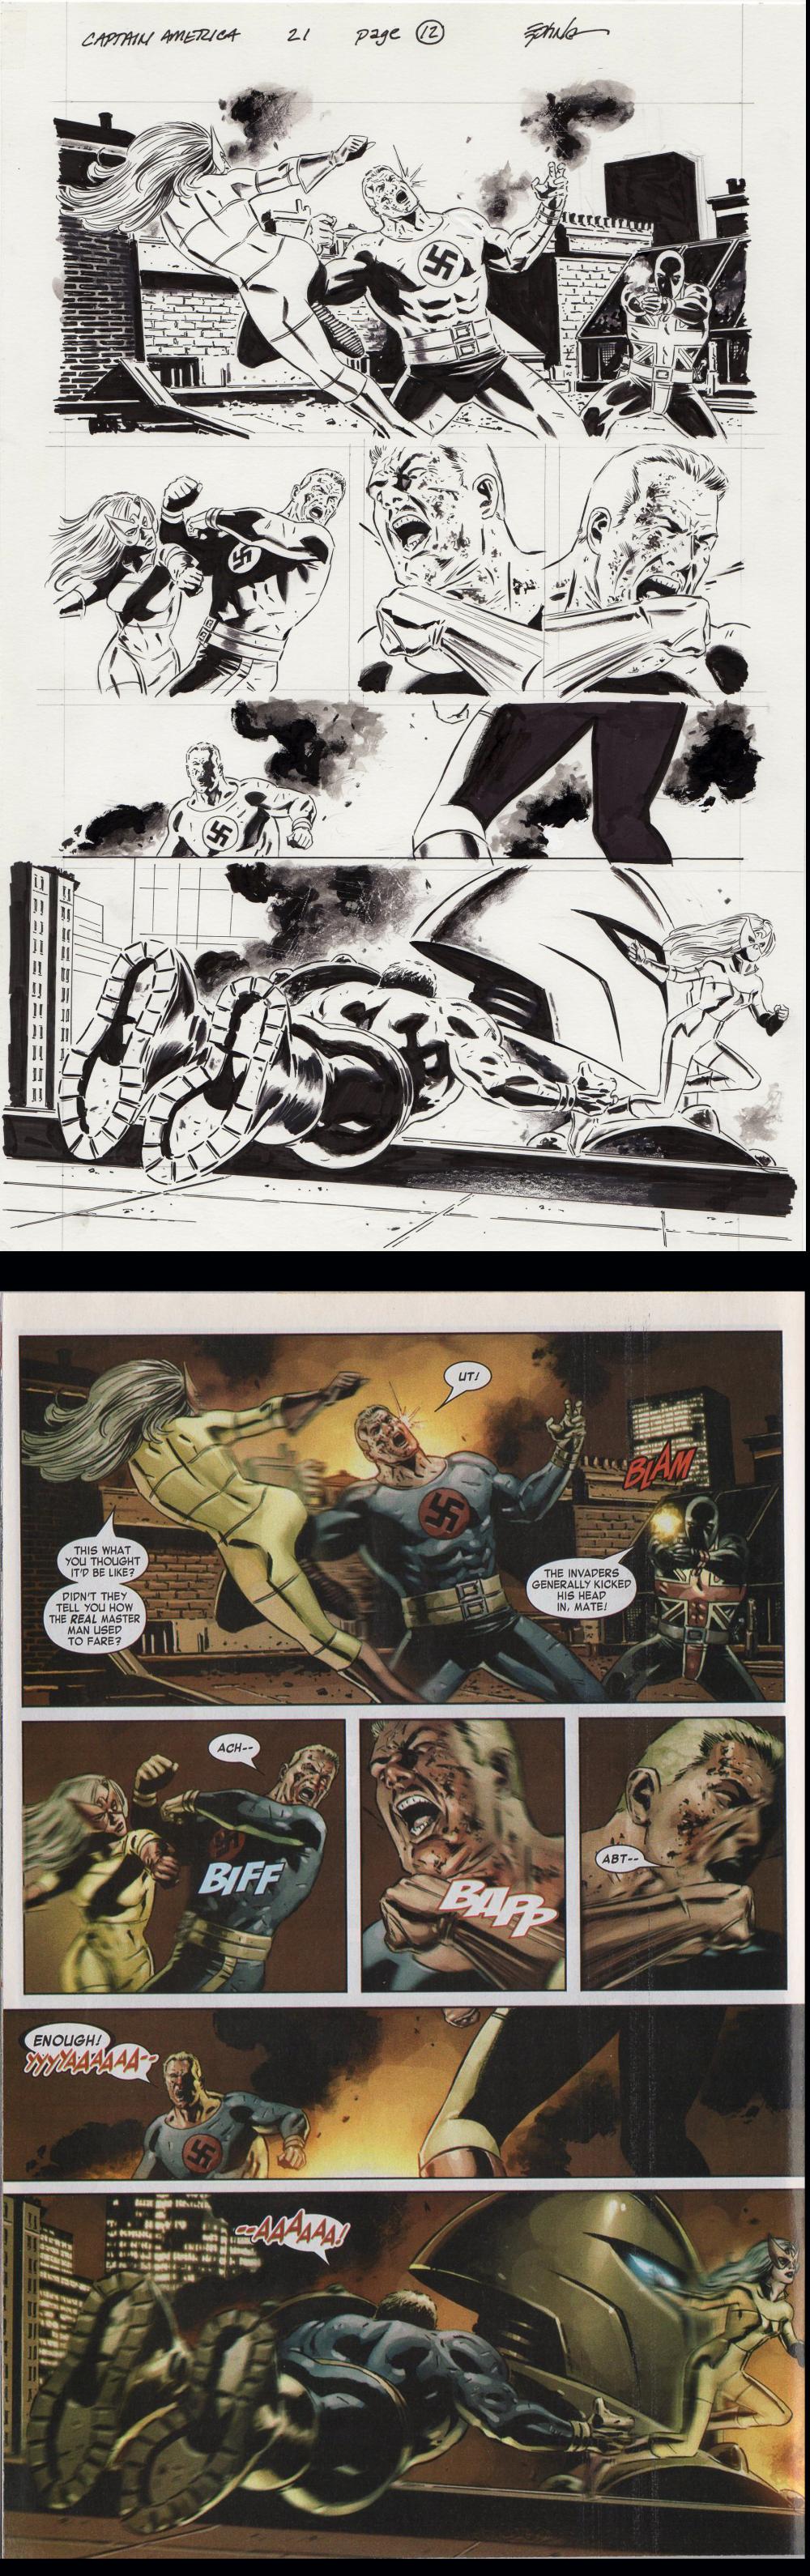 Image: Captain America Vol 5 #21 page 12 art by Steve Epting